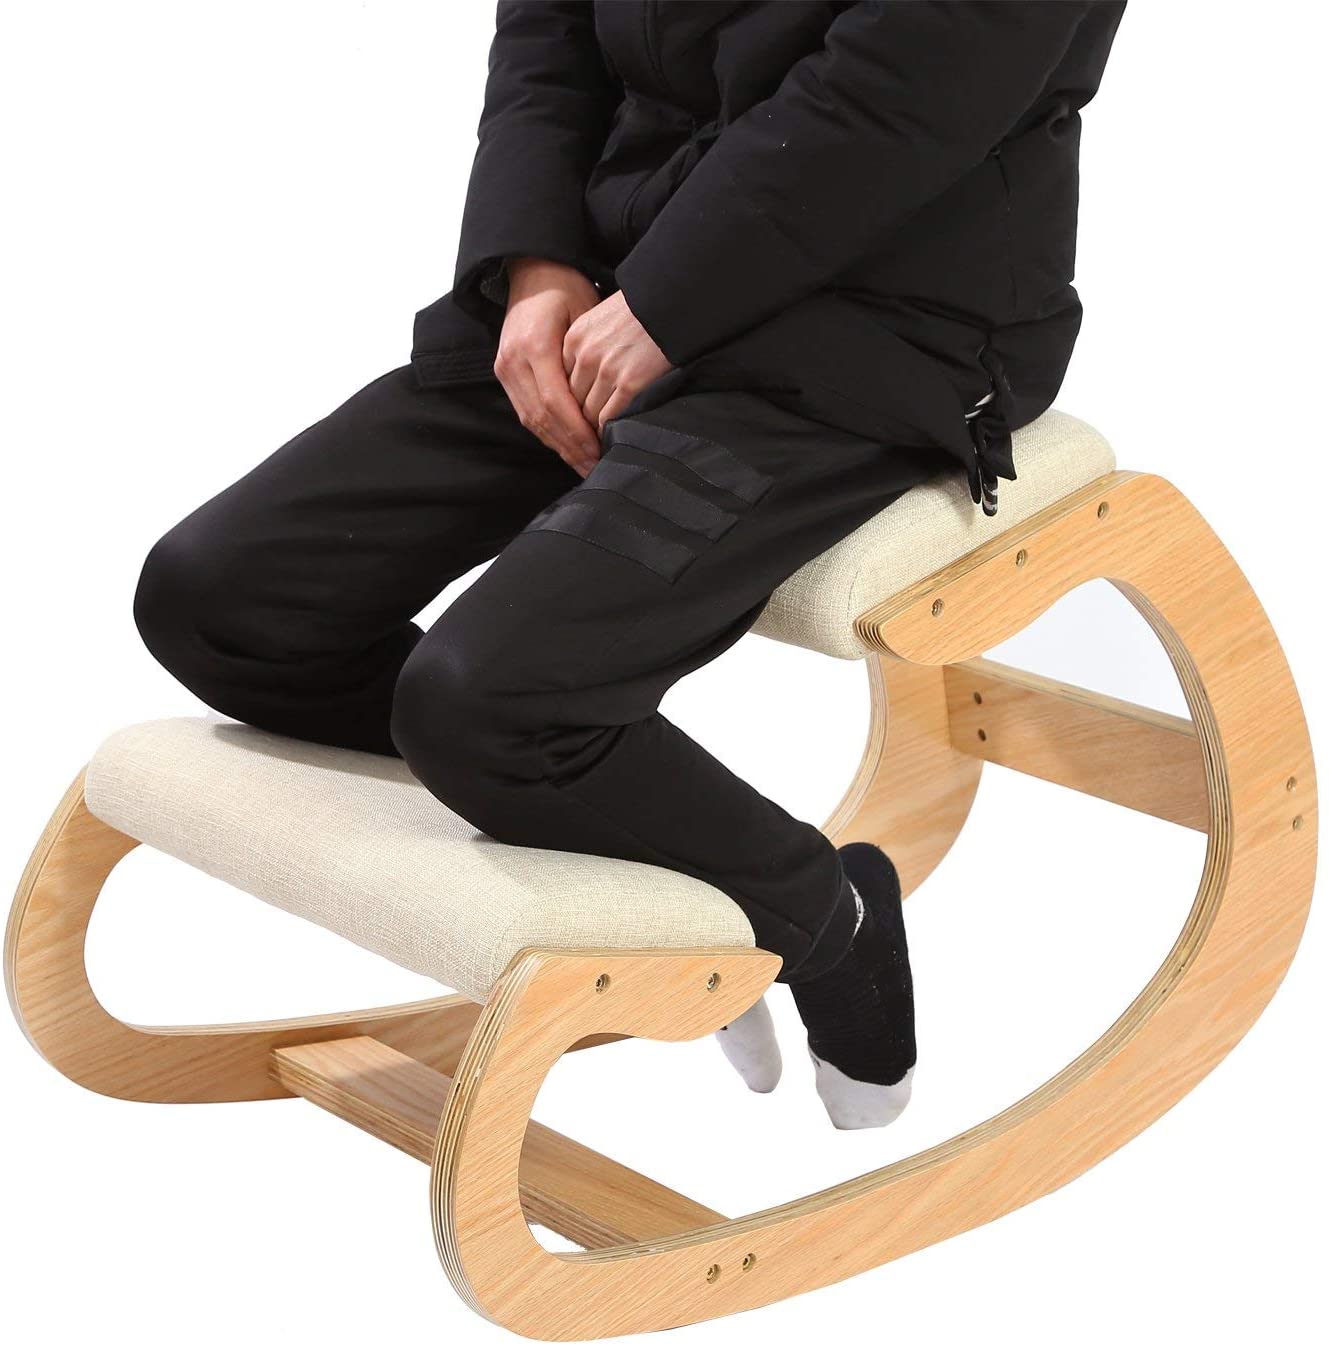 Review of Rocking Kneeling Chair for Upright Posture by Predawn